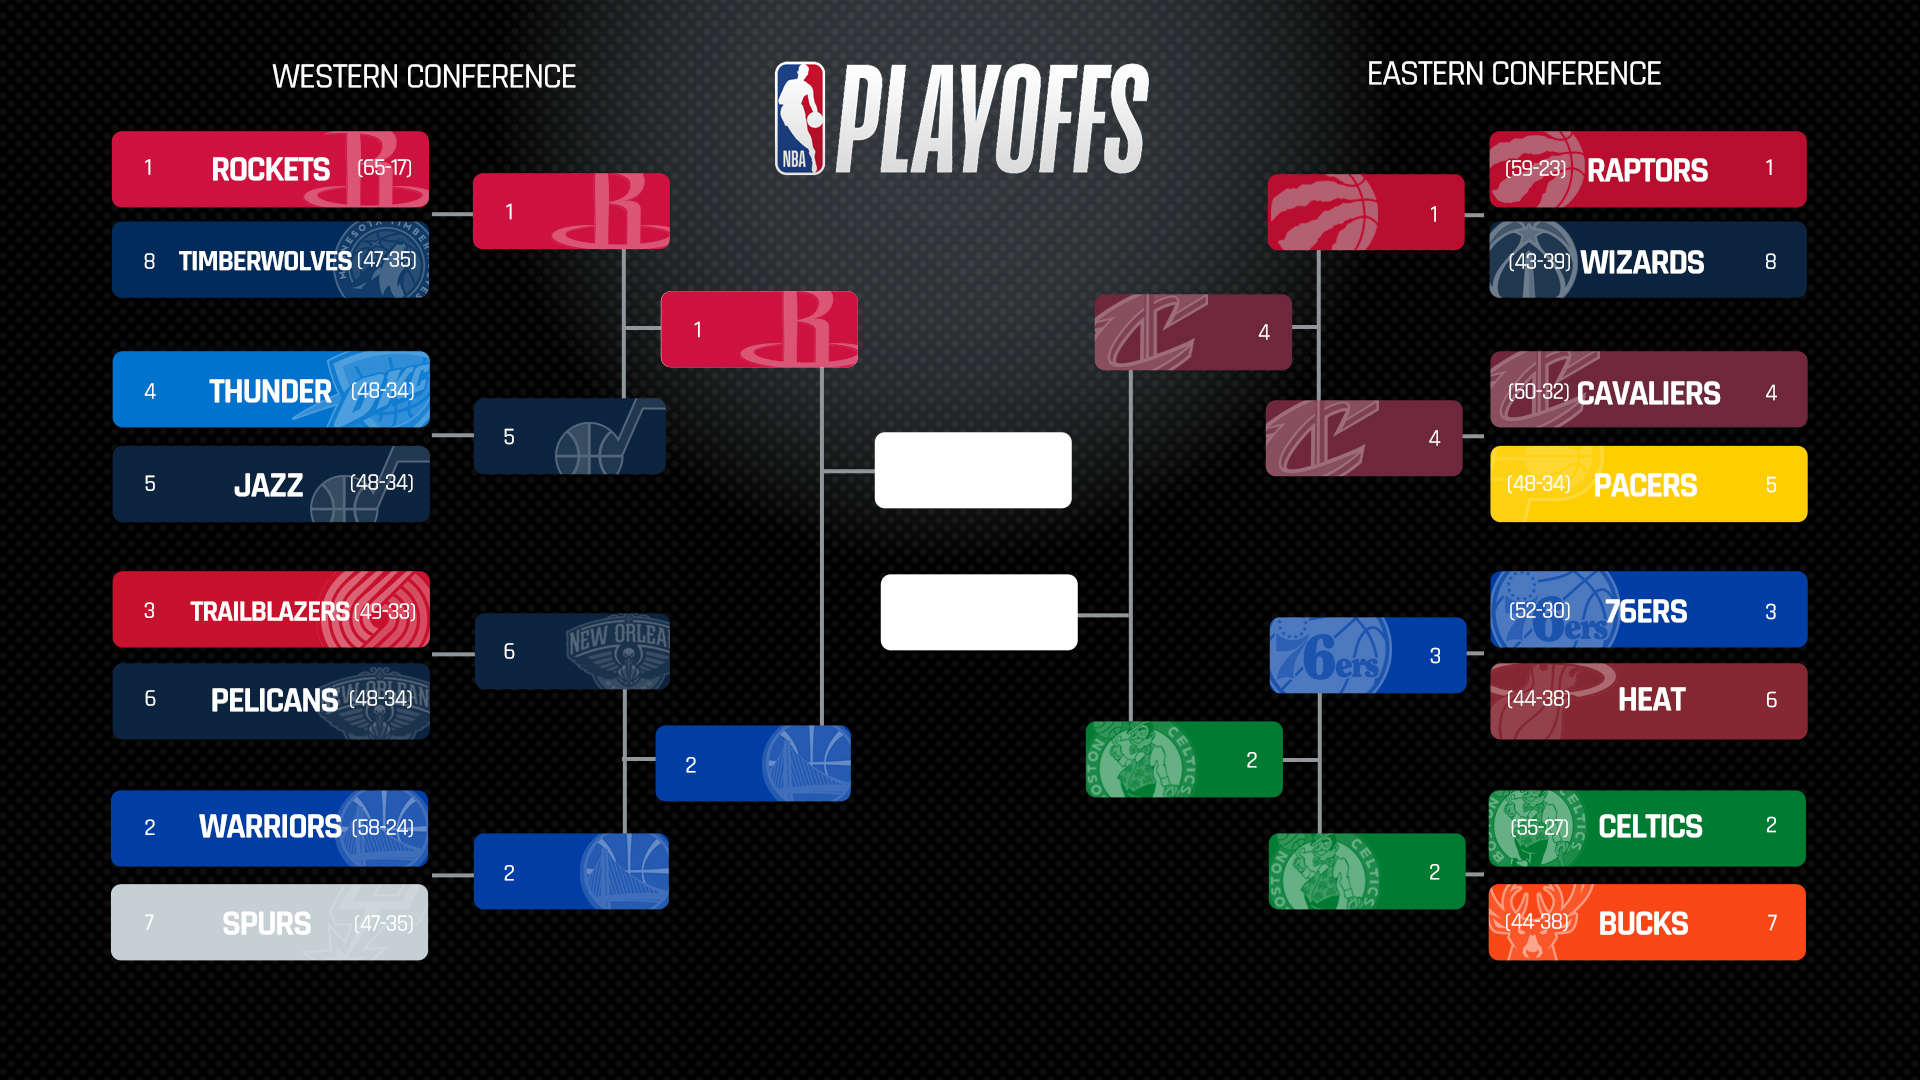 NBA playoffs 2018: Today's score, schedule, live updates | Sporting